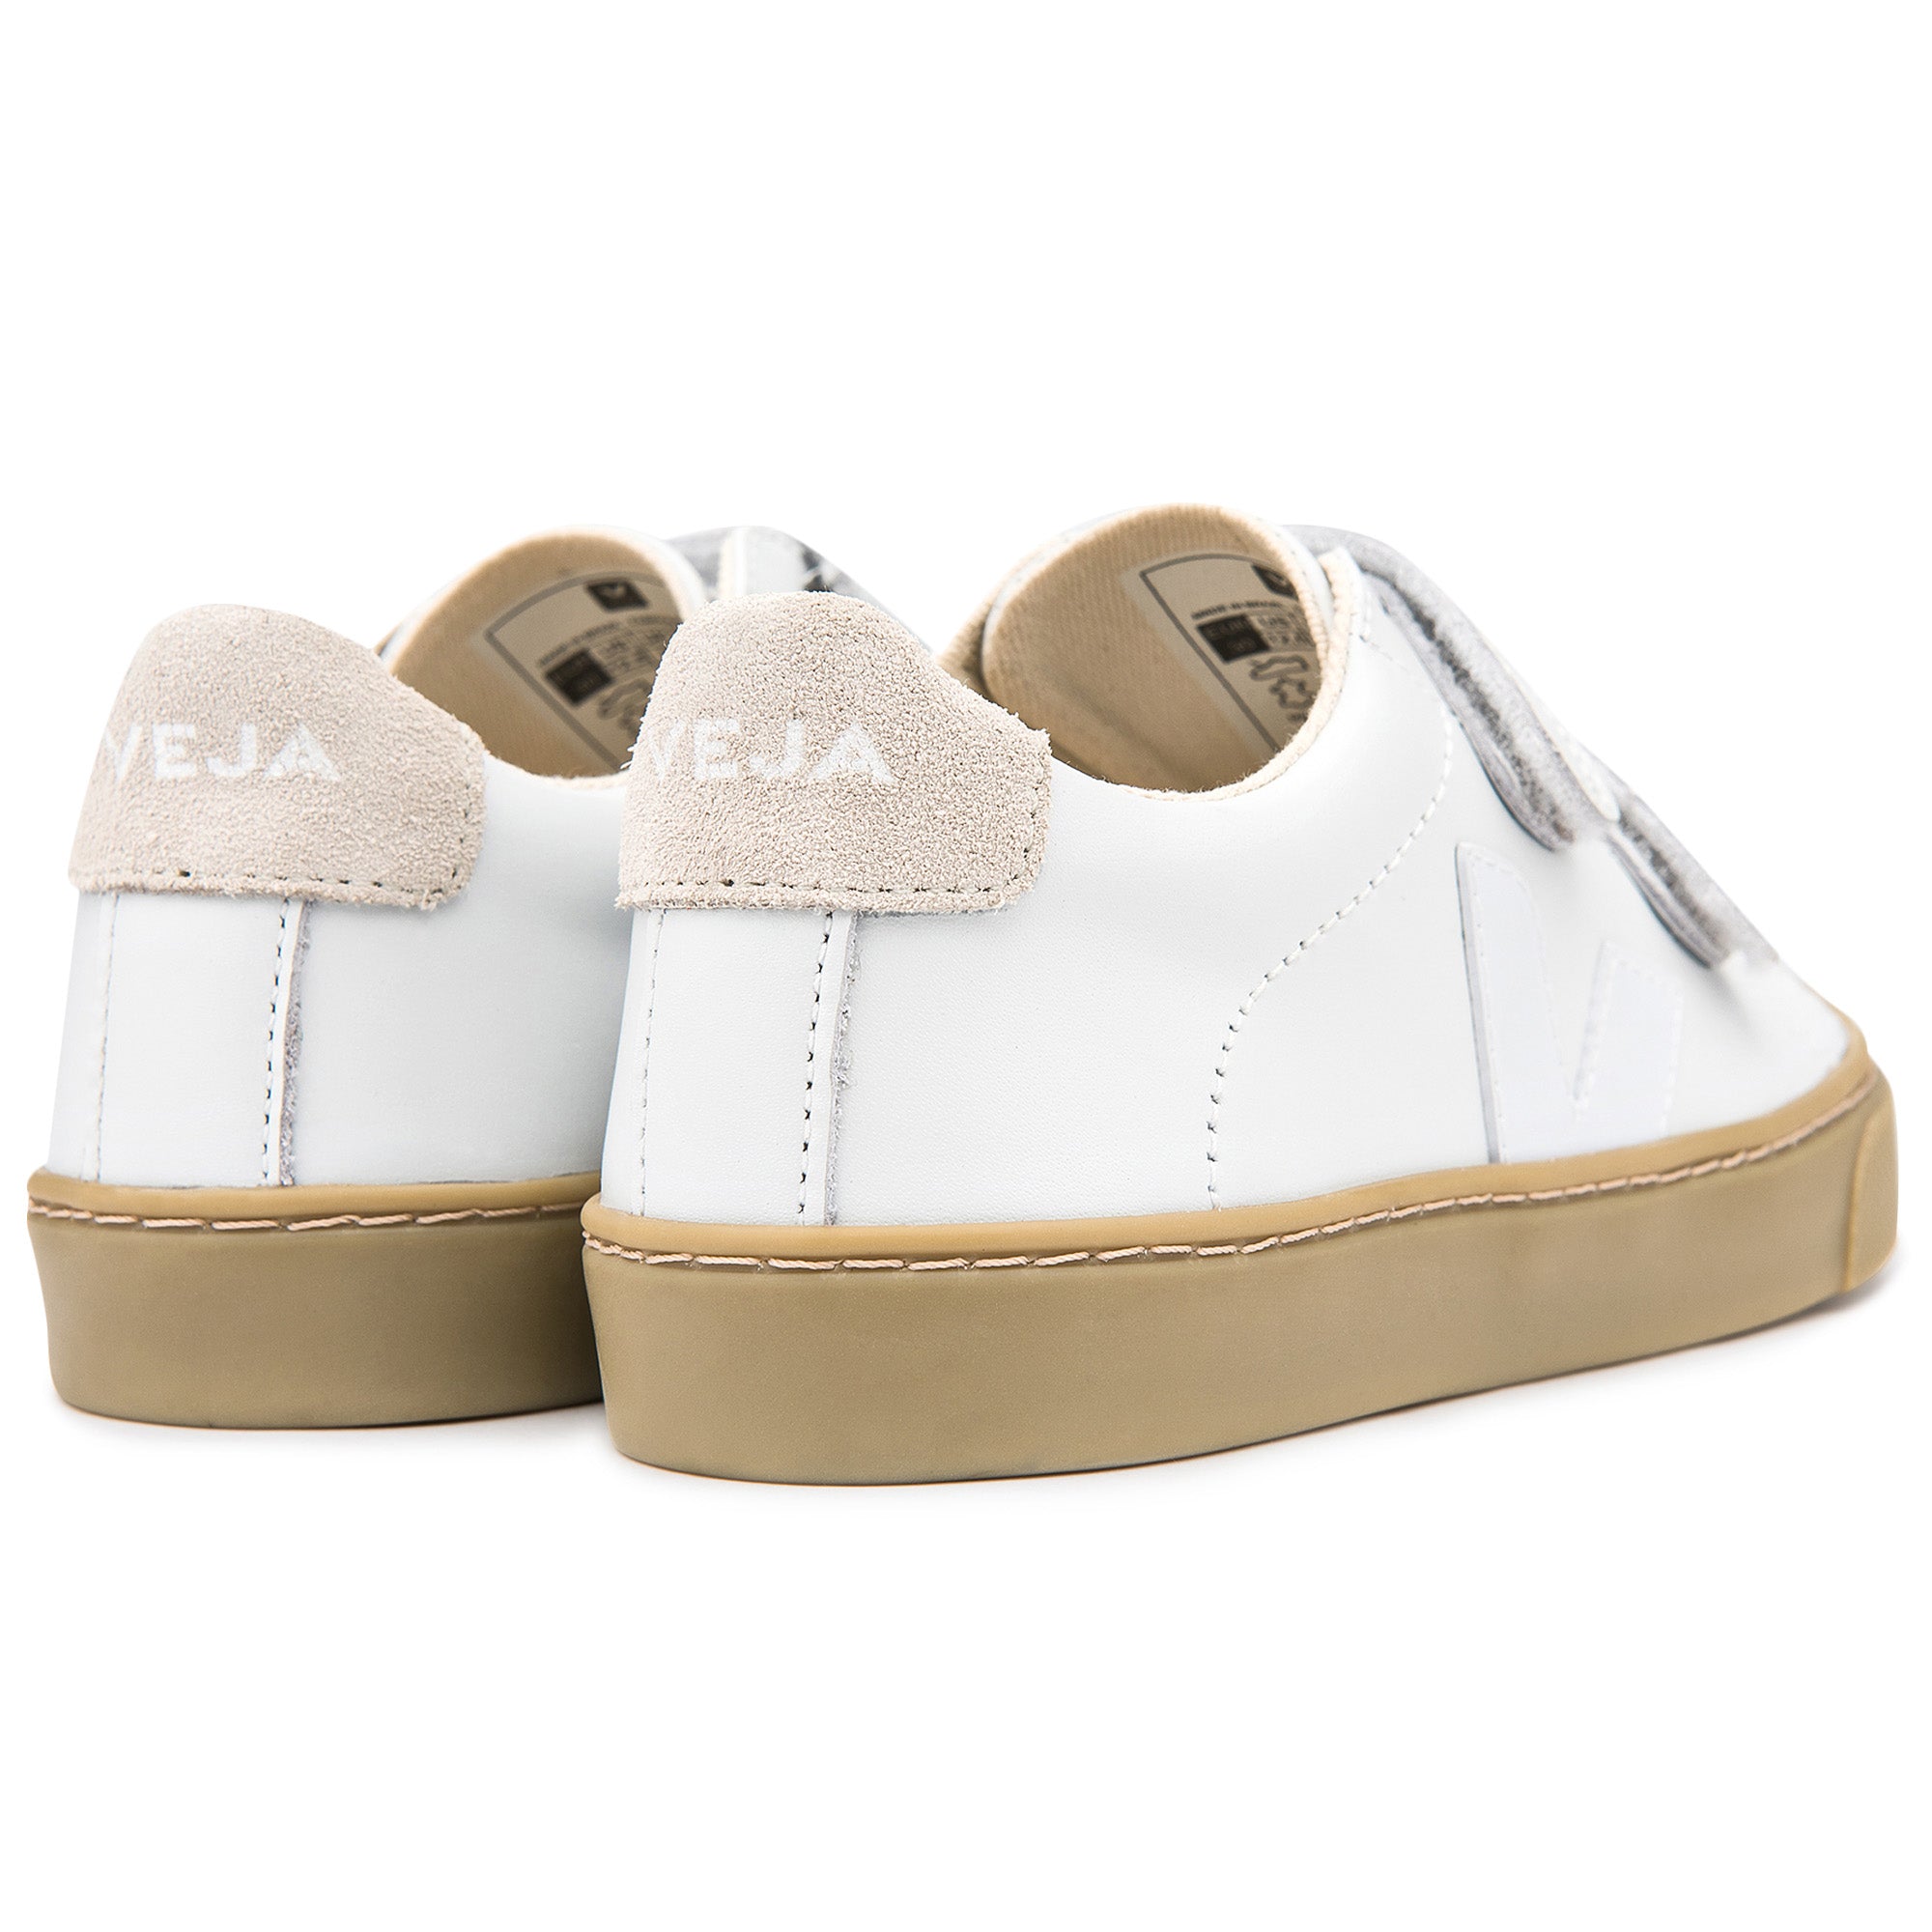 Bbay  Girls  White   Leather Velcro   With  White  "V" Shoes